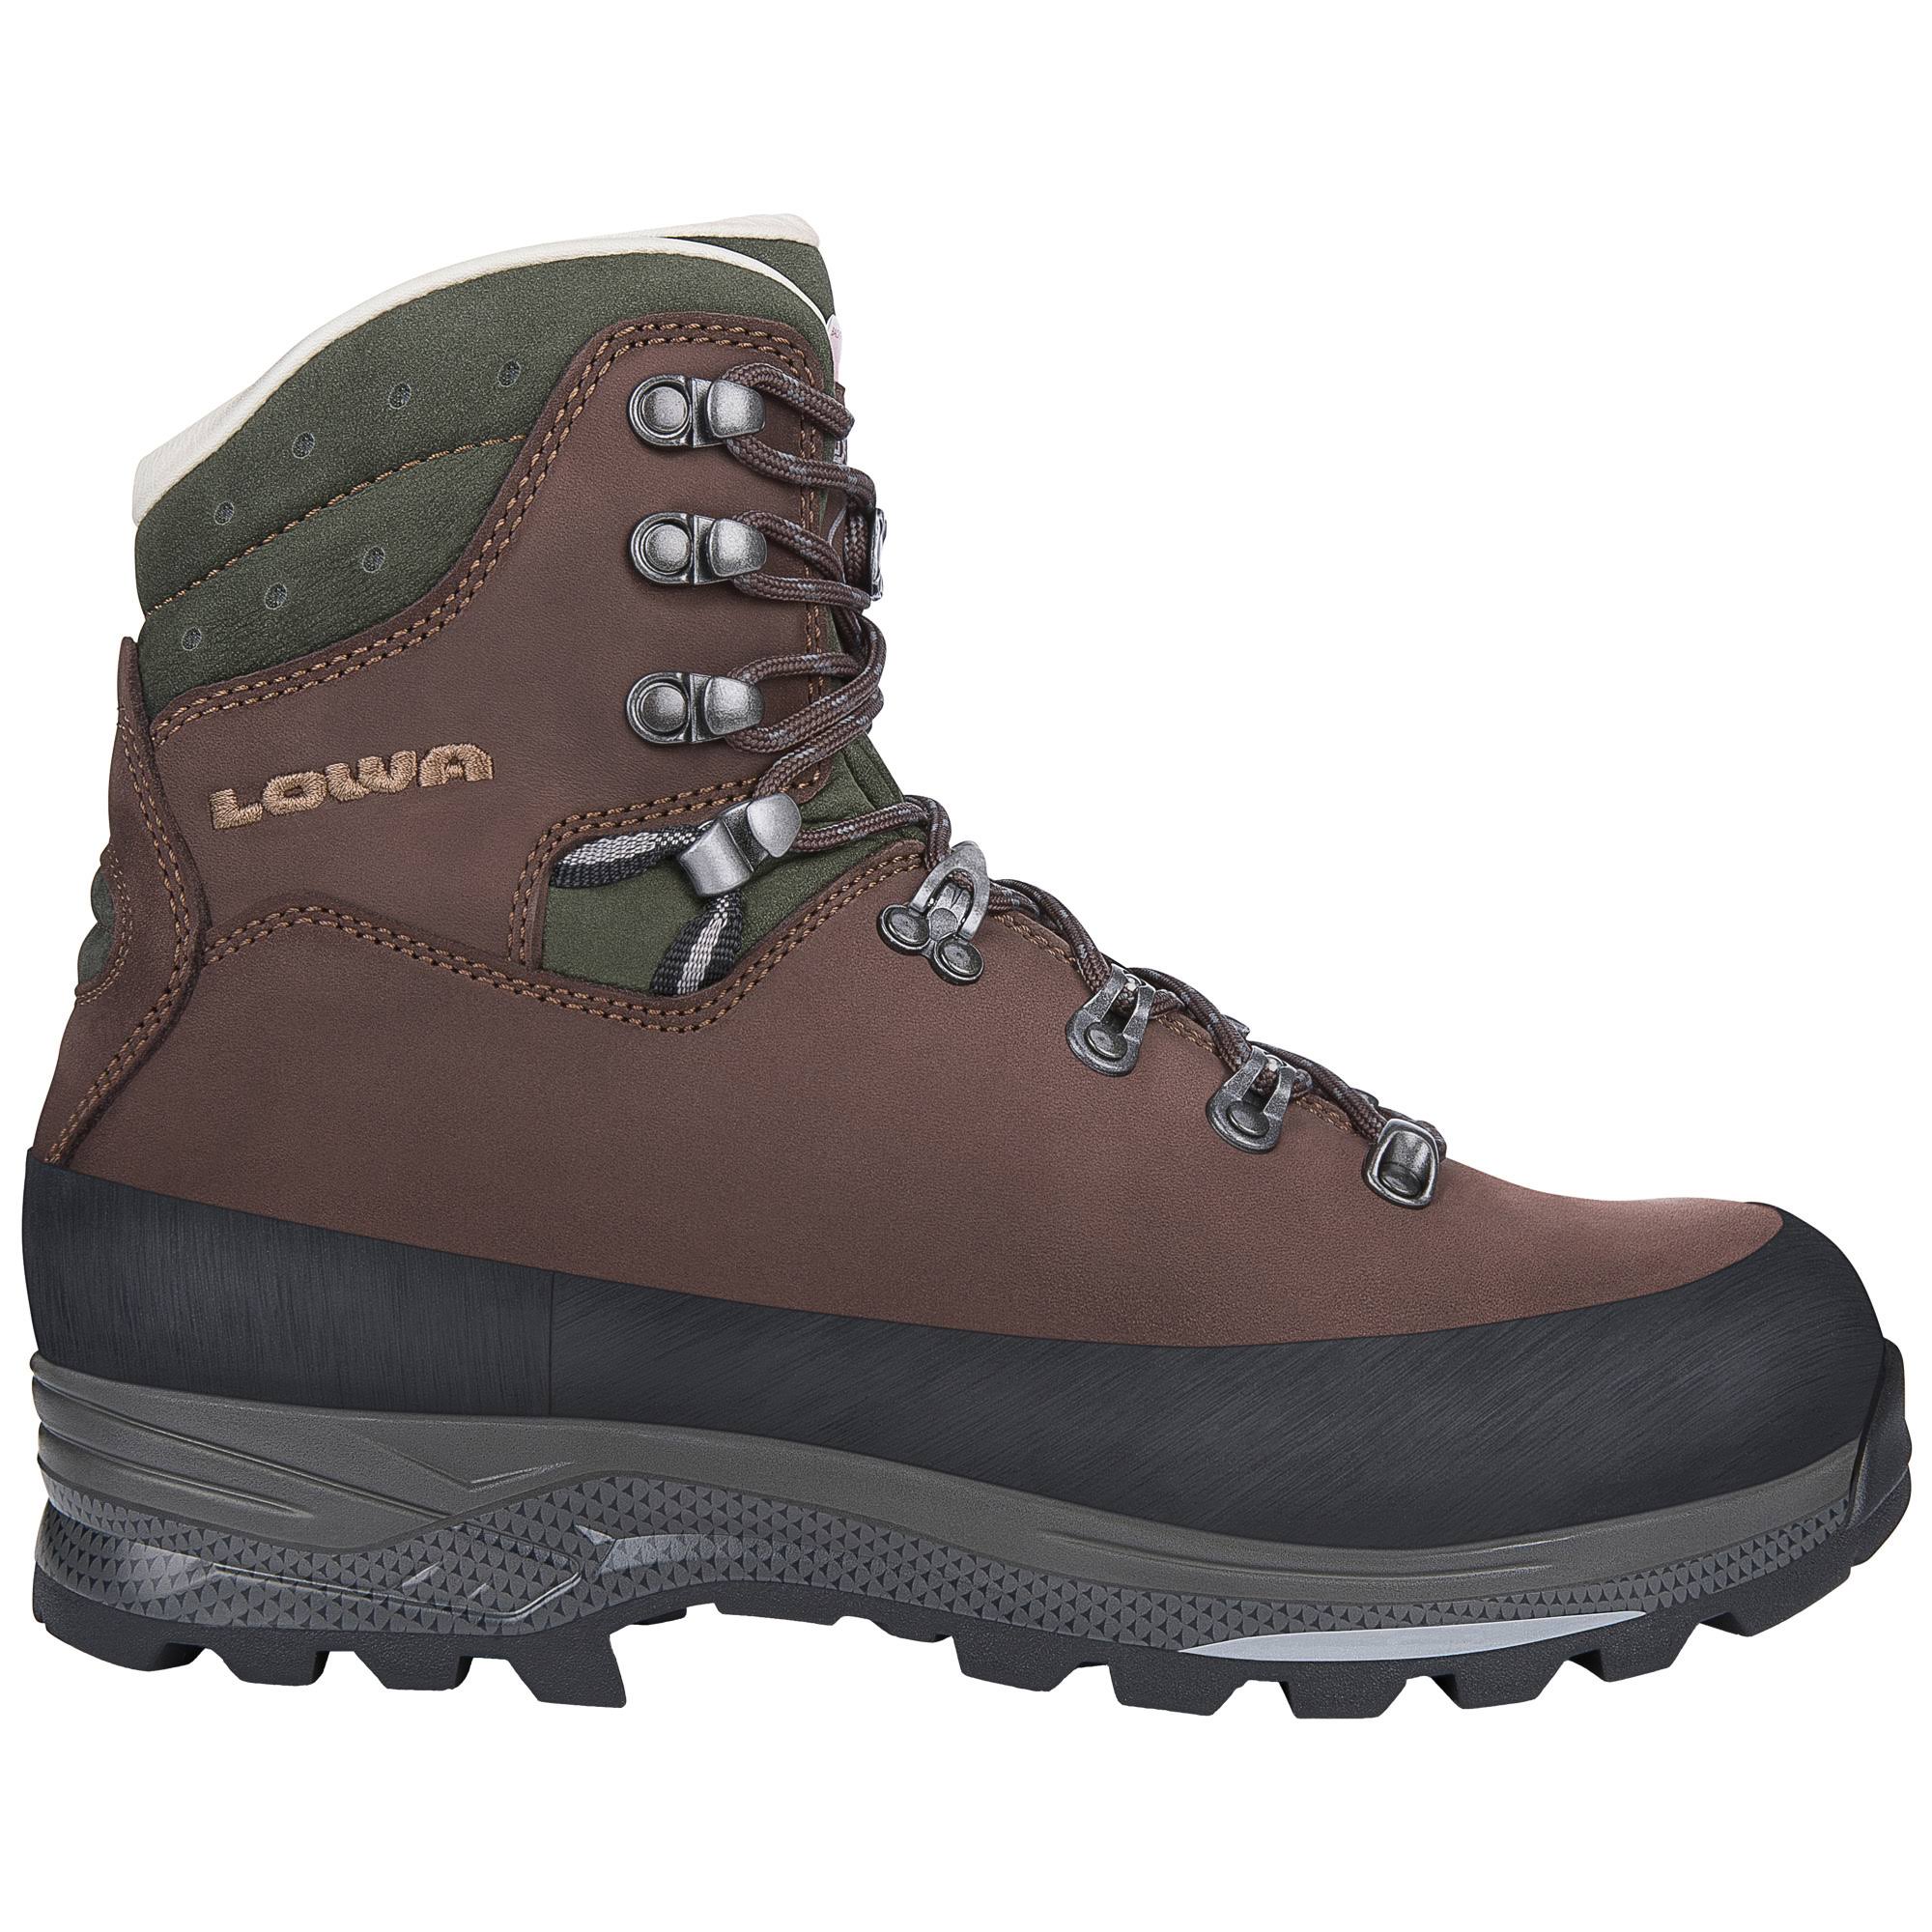 Chestnut/Anthracite Lowa Men's Baffin Pro LL II Wide Backpacking Boots - 10.5